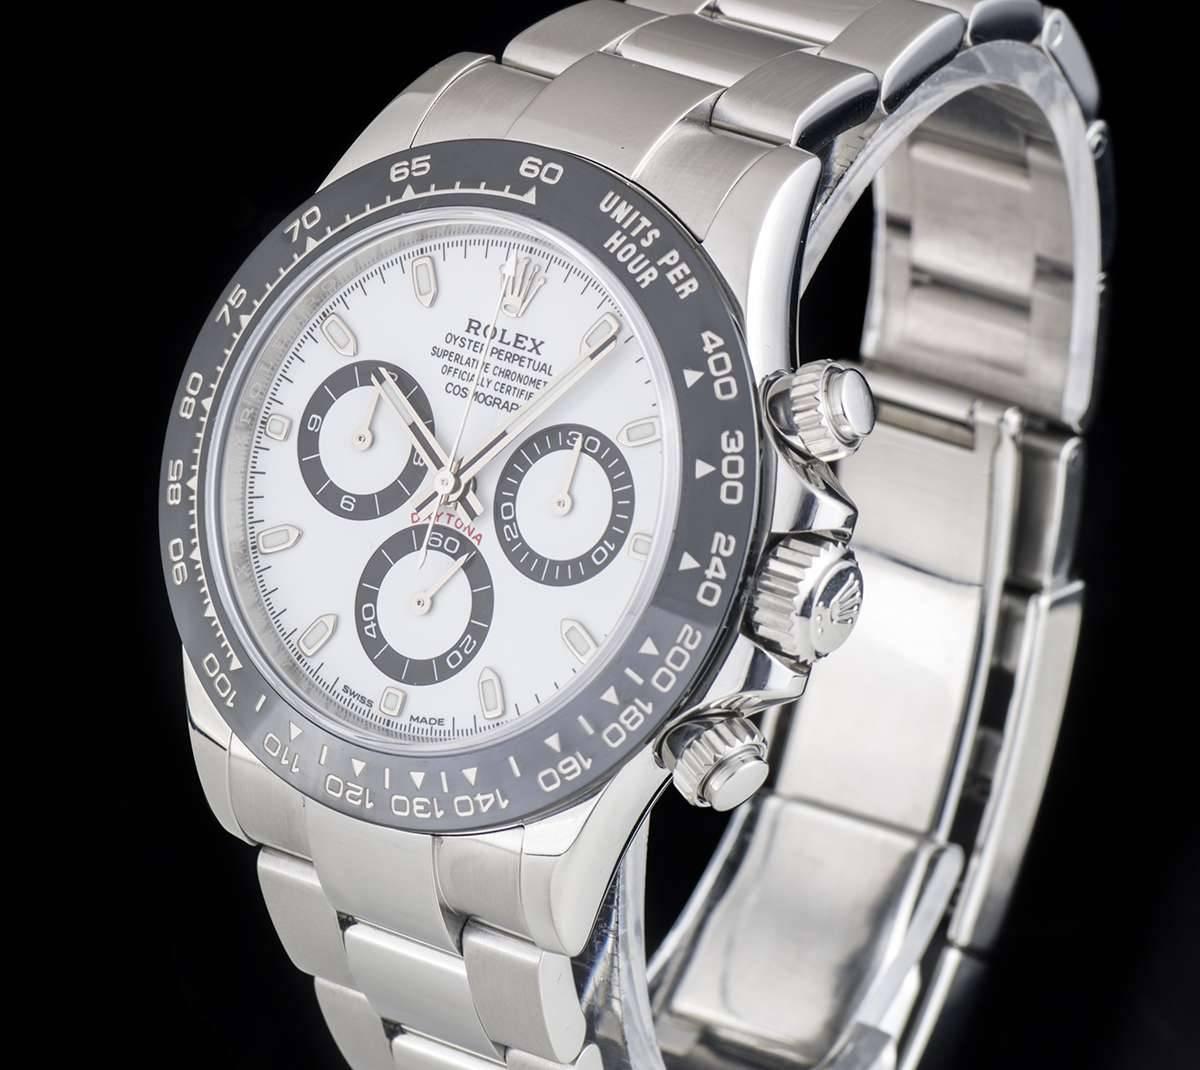 A Stainless Steel Oyster Perpetual Cosmograph Daytona Gents Wristwatch, white dial with applied hour markers, 30 minute recorder at 3 0'clock, small seconds at 6 0'clock, 12 hour recorder at 9 0'clock, a fixed black ceramic bezel with an engraved